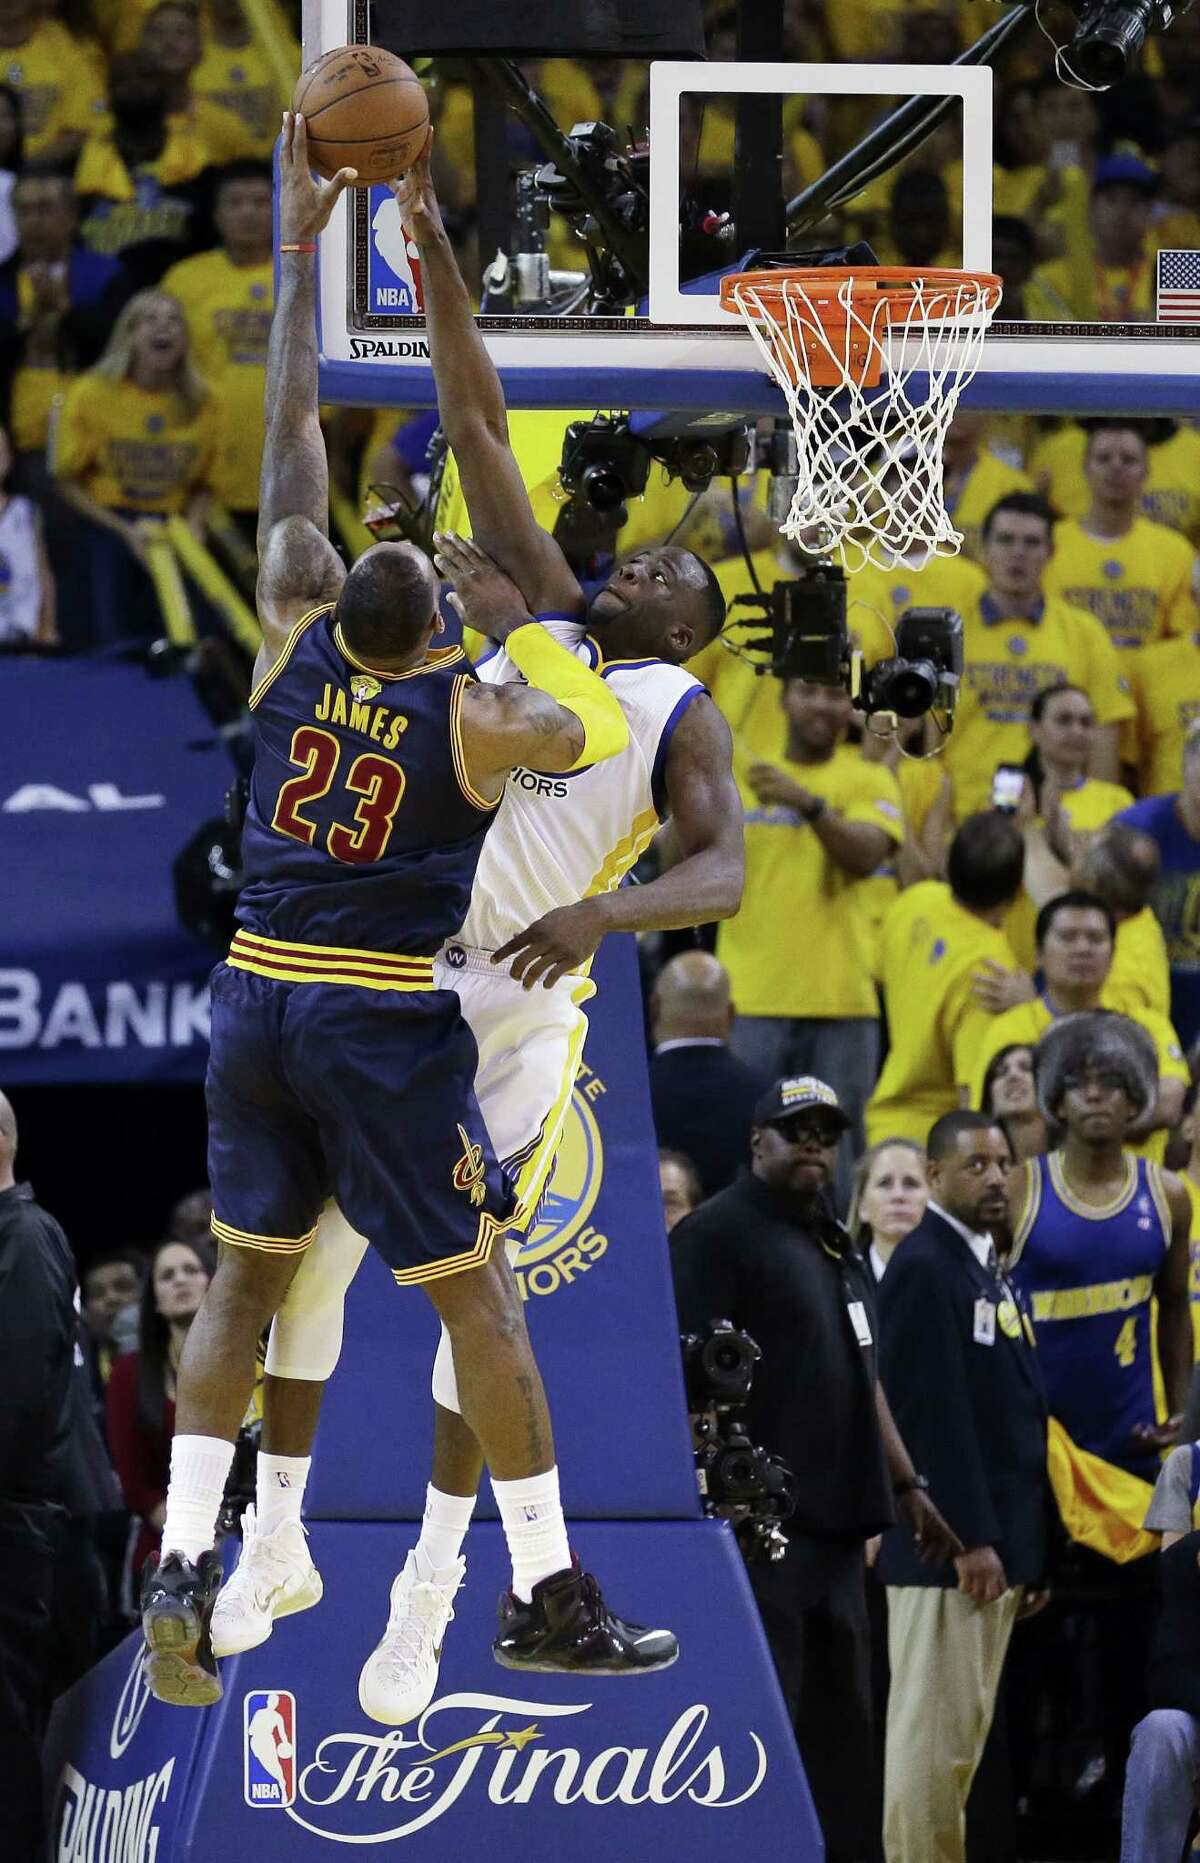 Golden State Warriors forward Draymond Green, right, blocks a shot attempt by Cleveland Cavaliers forward LeBron James during the overtime period of Game 2 of basketball’s NBA Finals in Oakland, Calif. on June 7, 2015. The Cavaliers won 95-93 in overtime.